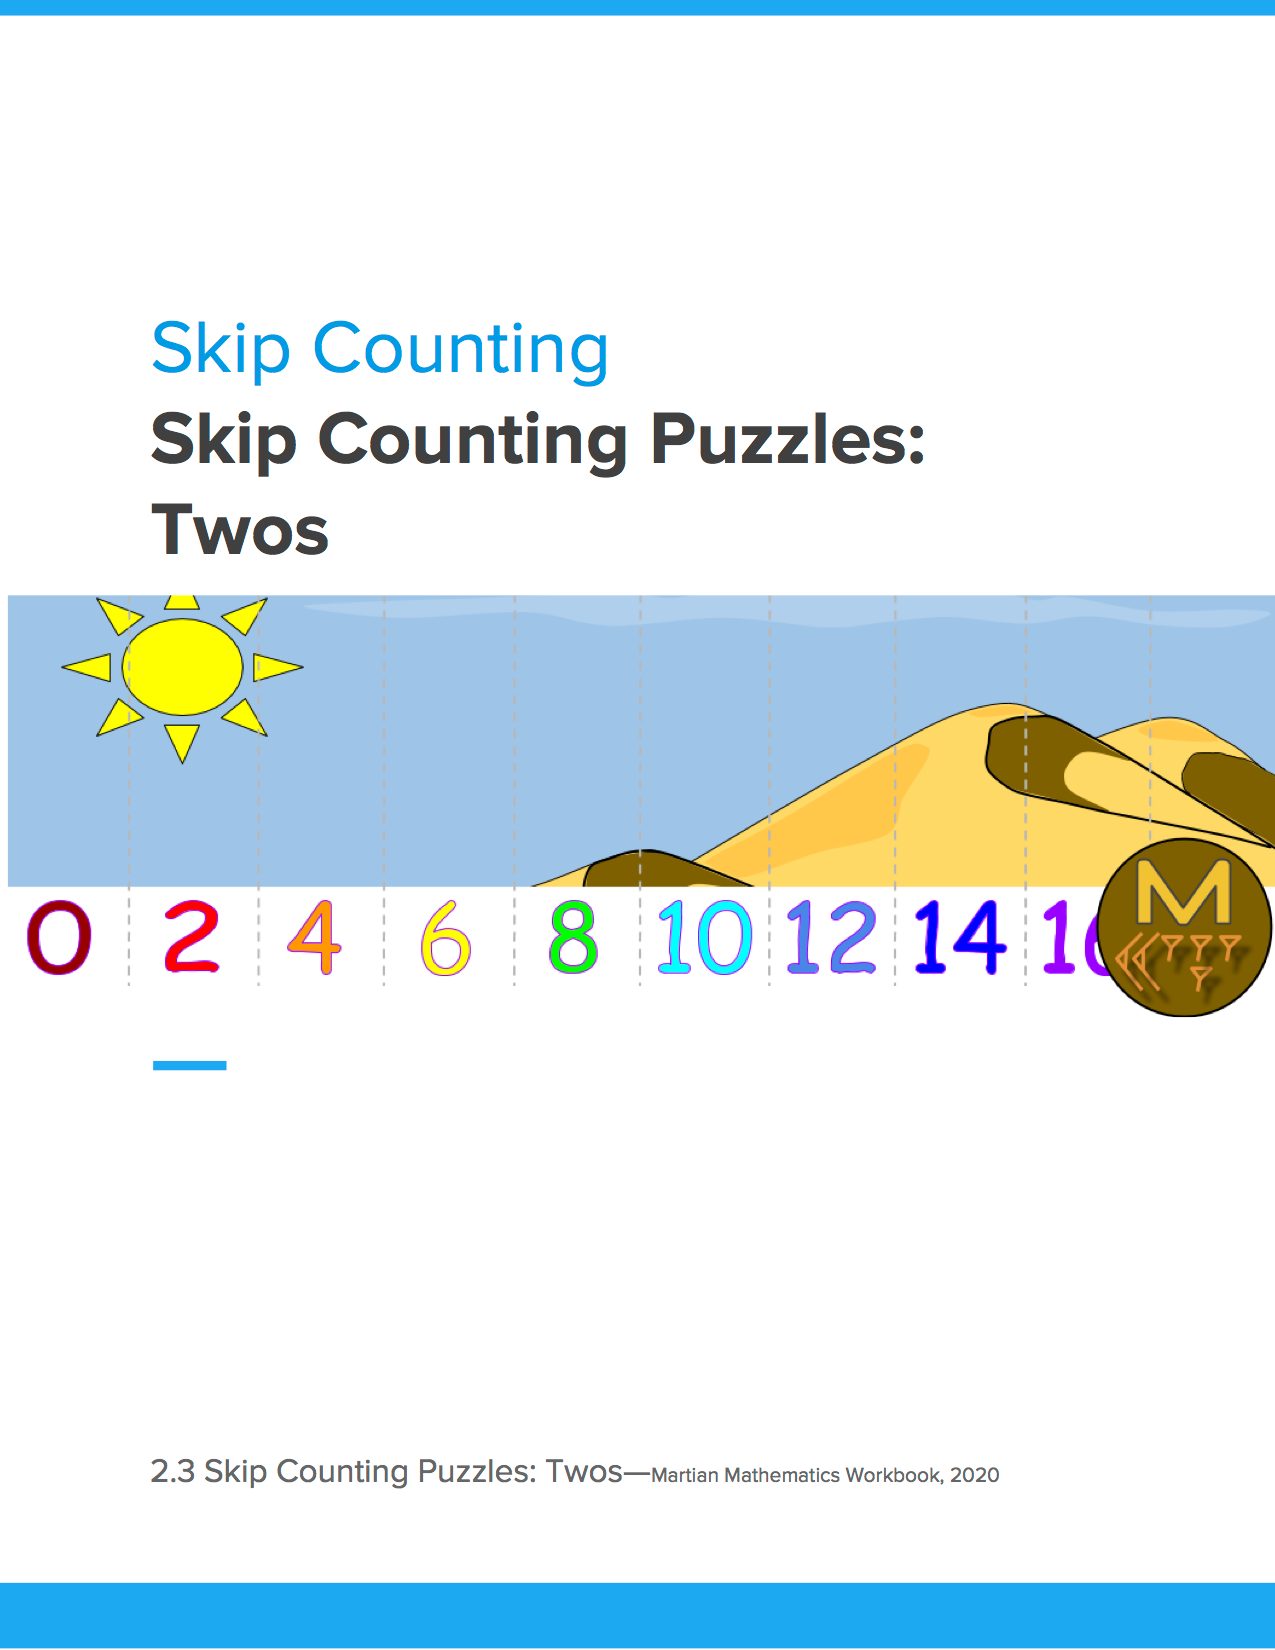 Skip Counting Puzzles: Twos